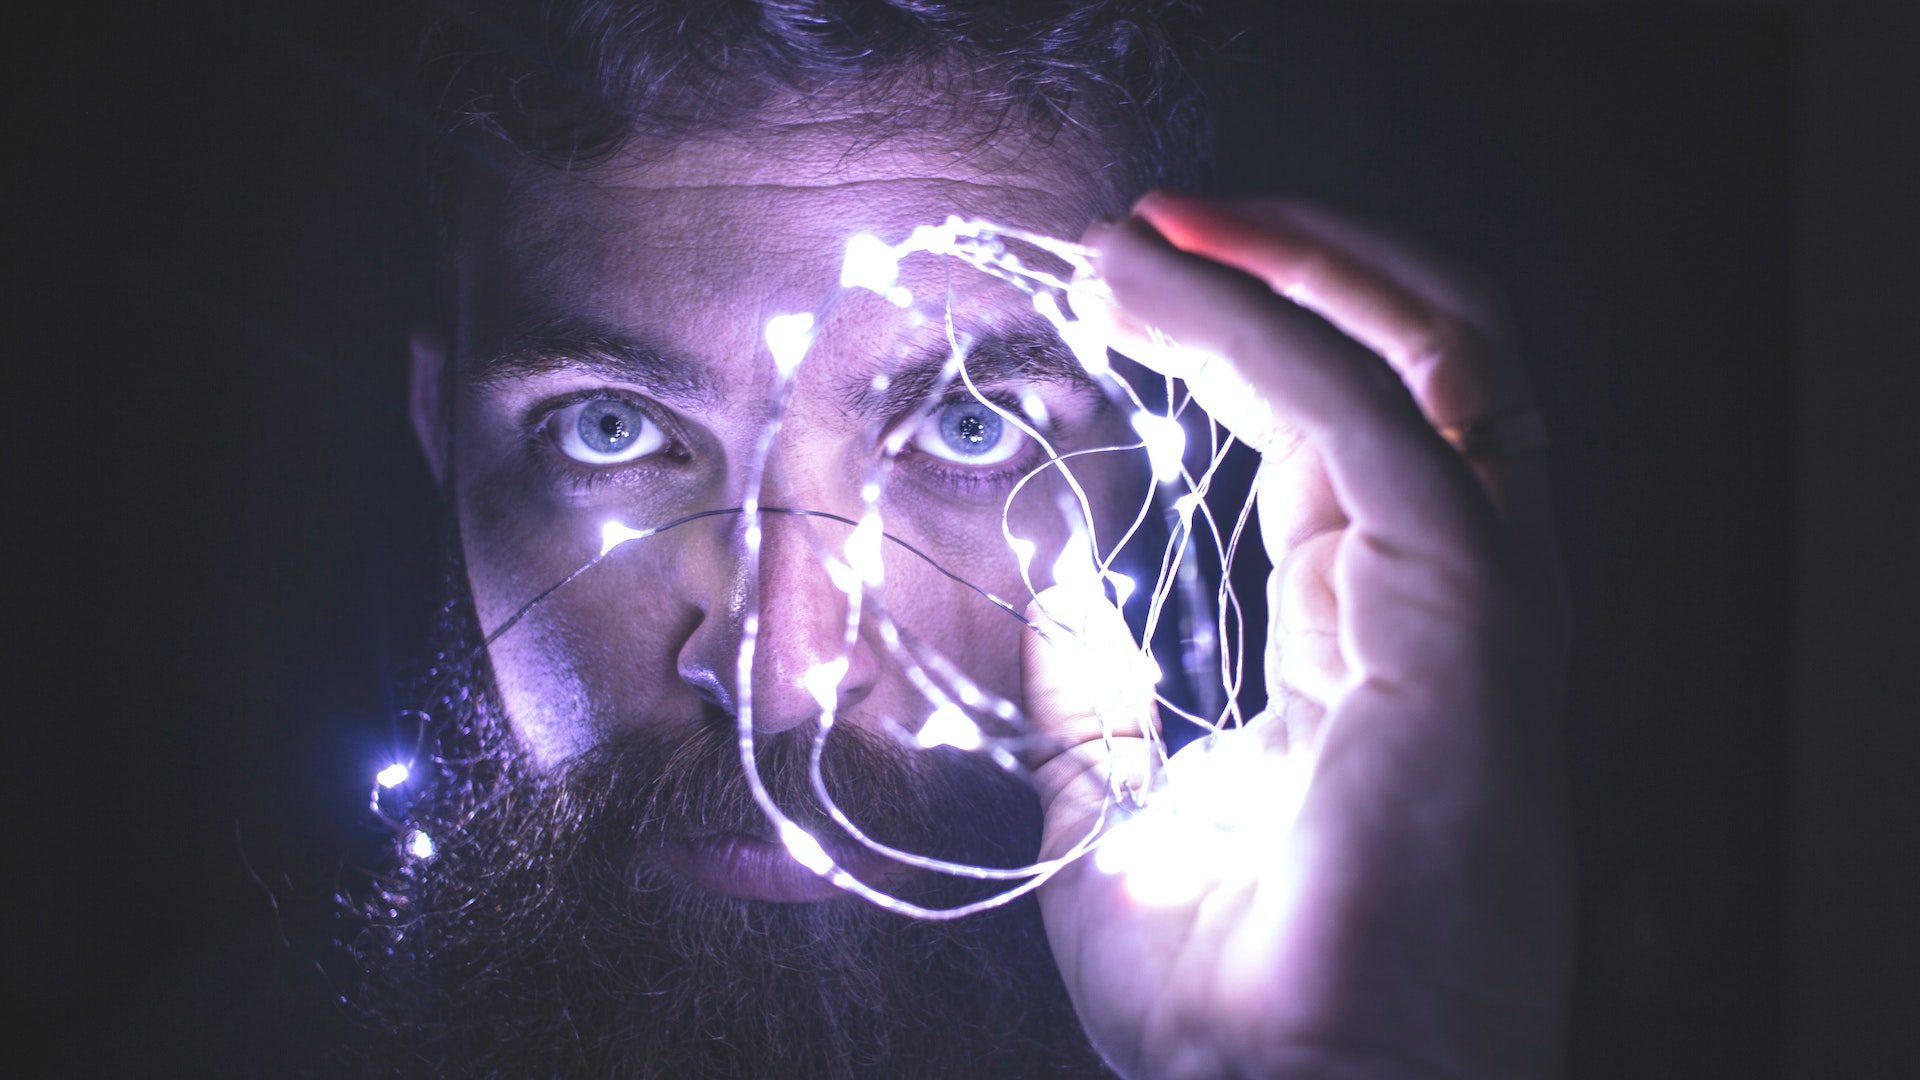 man looking through eerie lights he's holding up in front of his eye -- meant to convey a brain implant for the internet